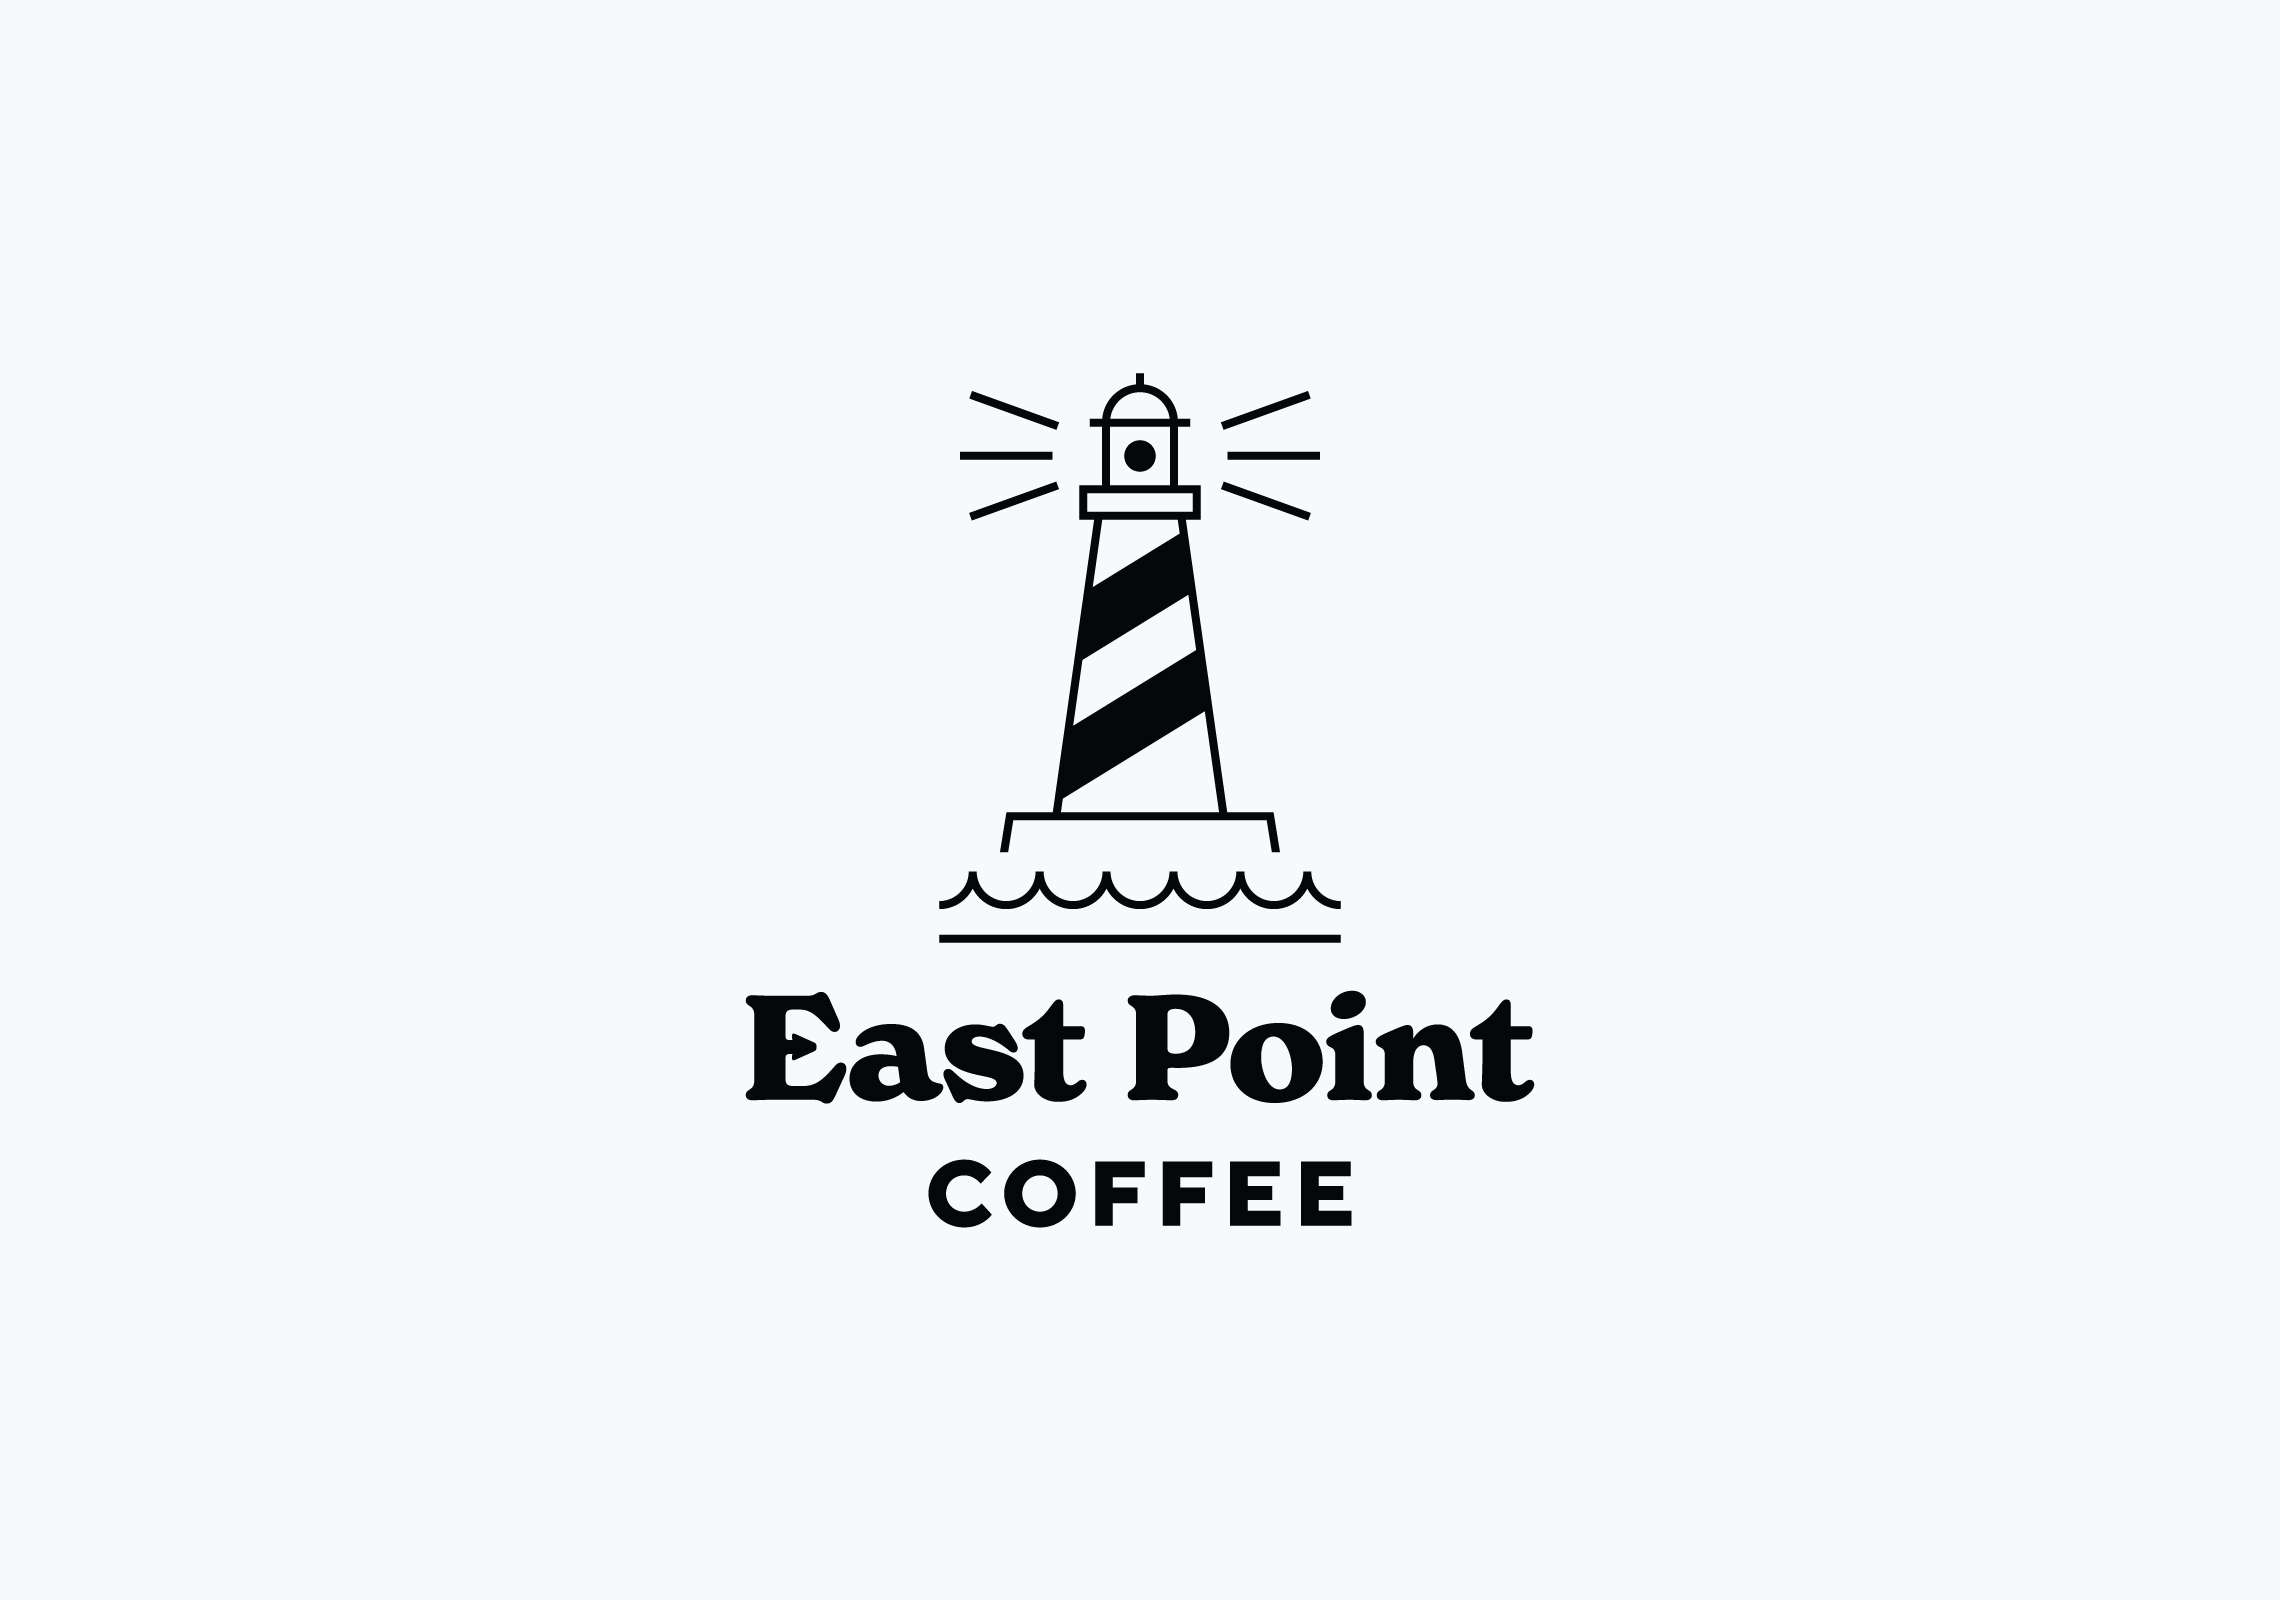 East Point Coffee Packaging Design